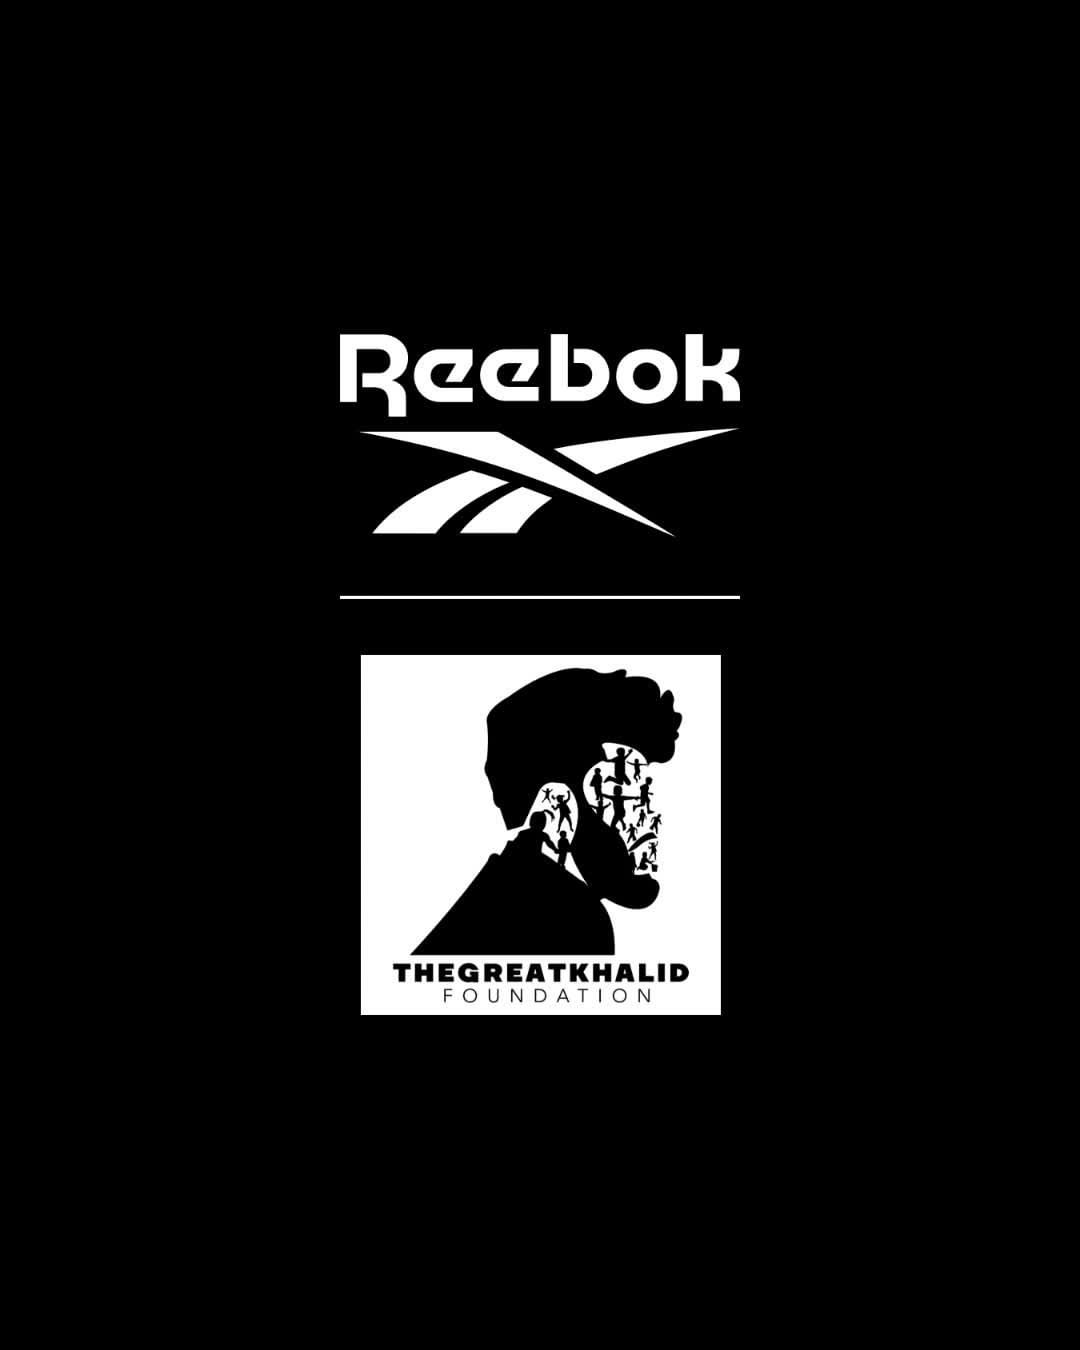 Reebok - Today, more than ever, your voices matter and need to be heard. We’ve teamed up with @thegreatkhalidfoundation to provide an aspiring singer/songwriter the opportunity to win a mentoring sess...